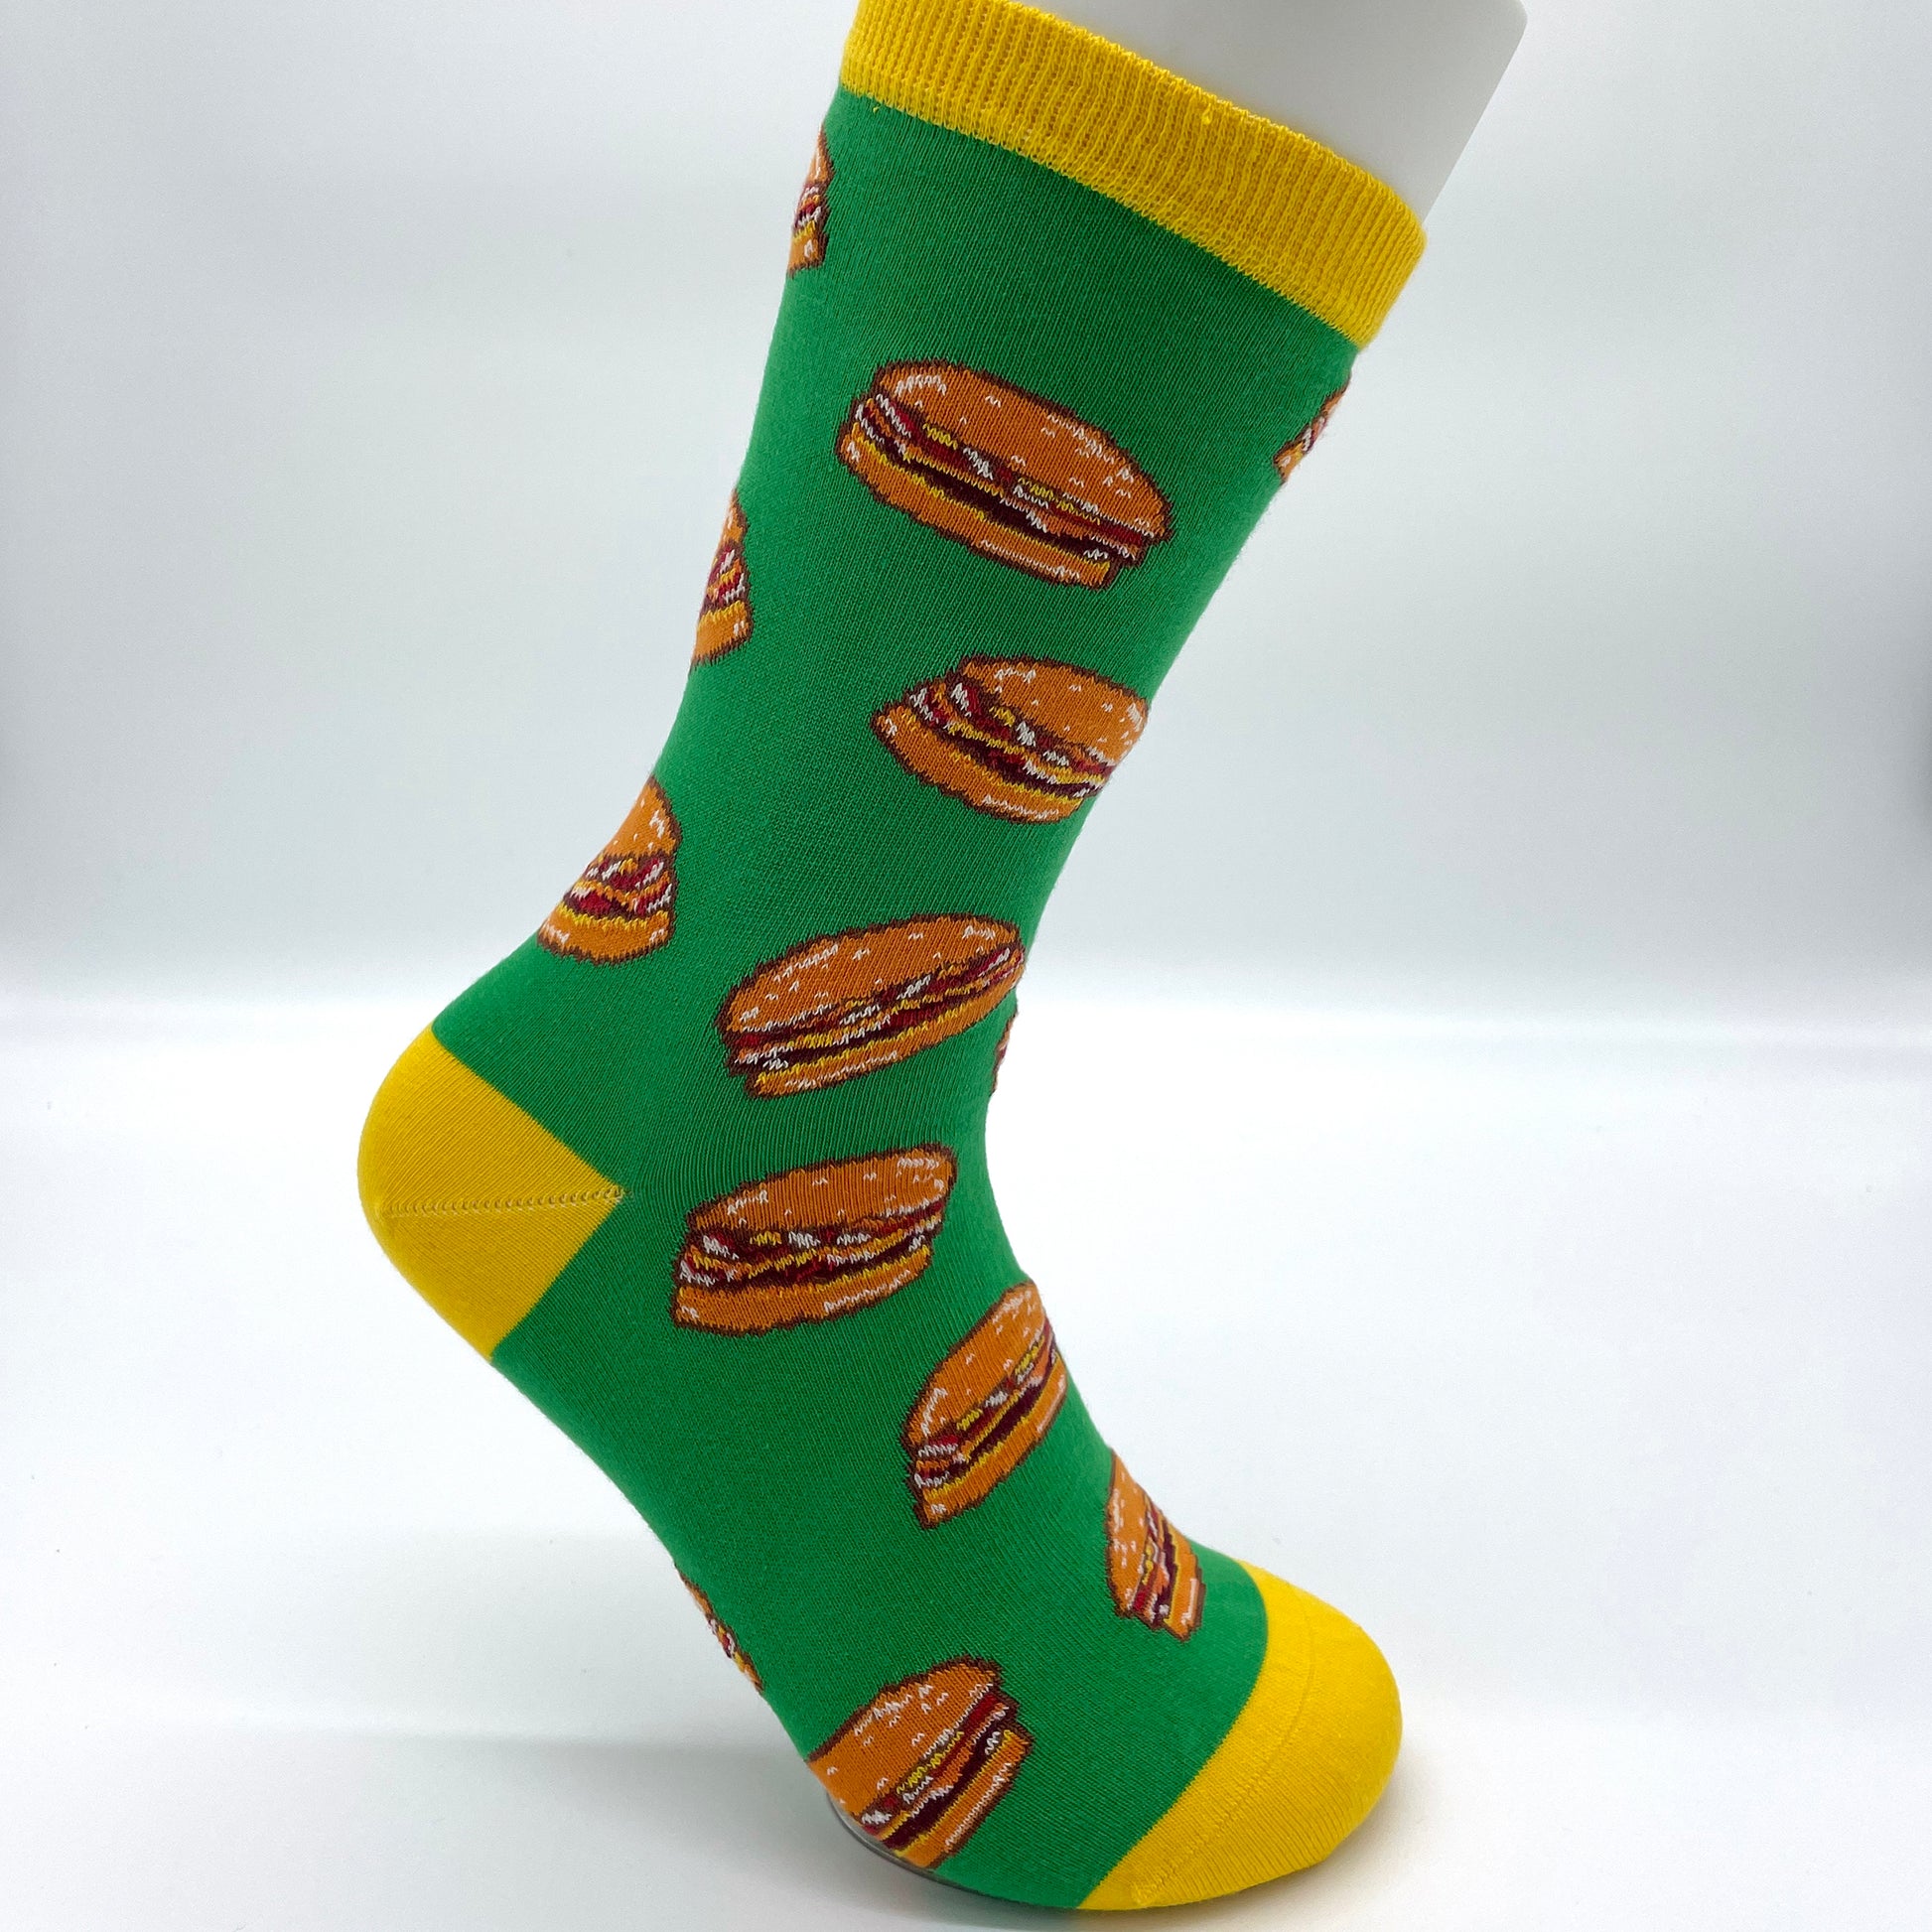 A white sock mannequin sports a green sock patterned with cheeseburgers. The welt, heel and toe are yellow.